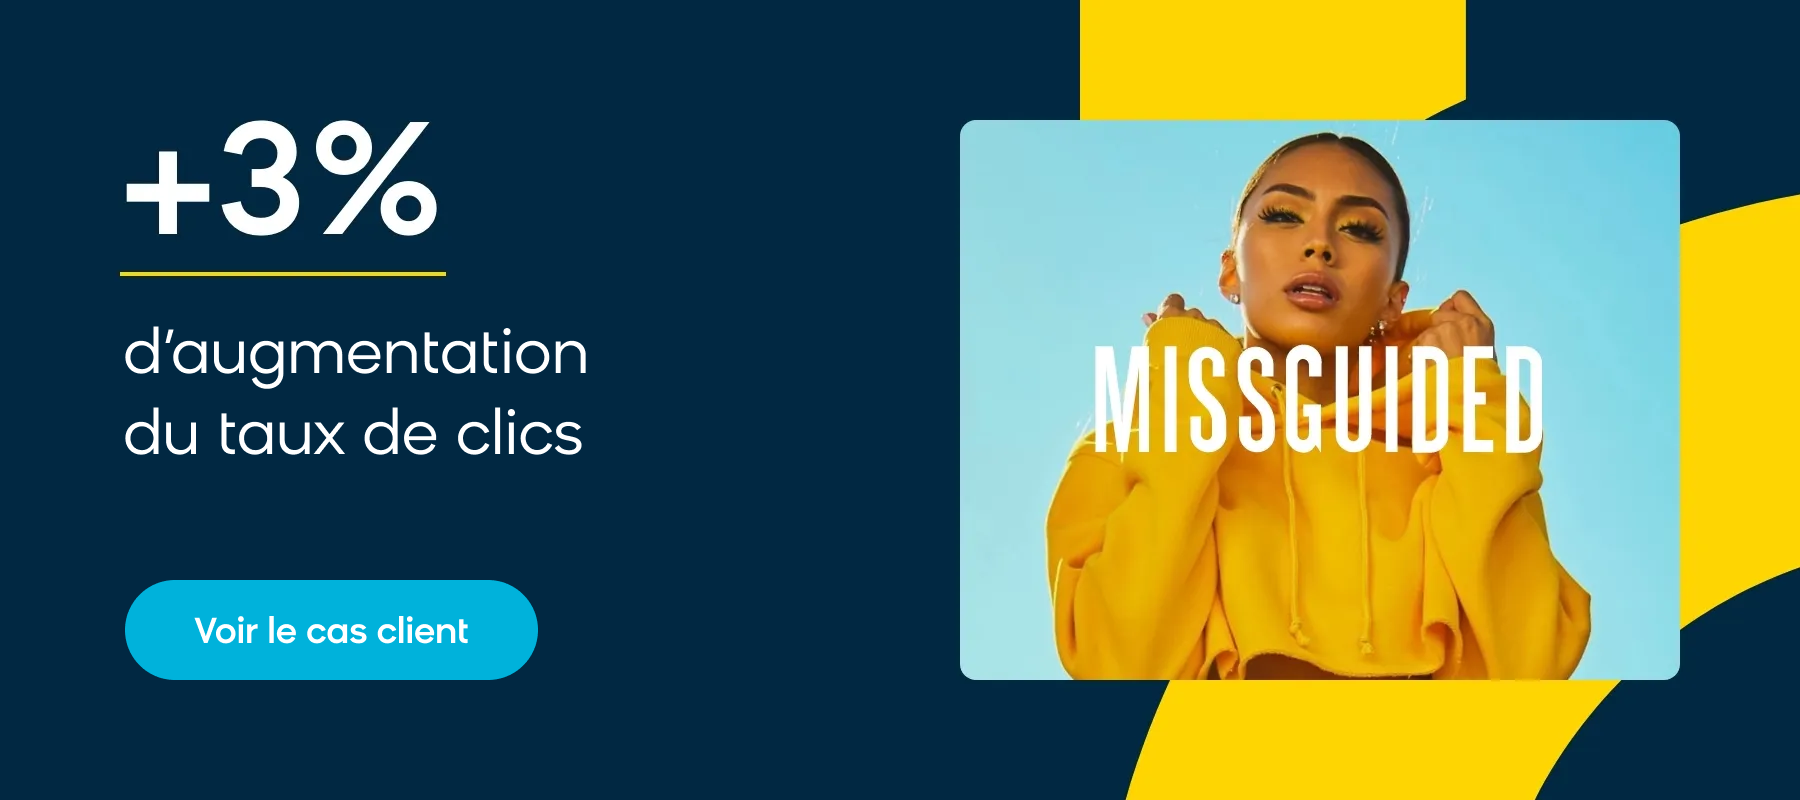 Missguided case study with Bloomreach Engagement